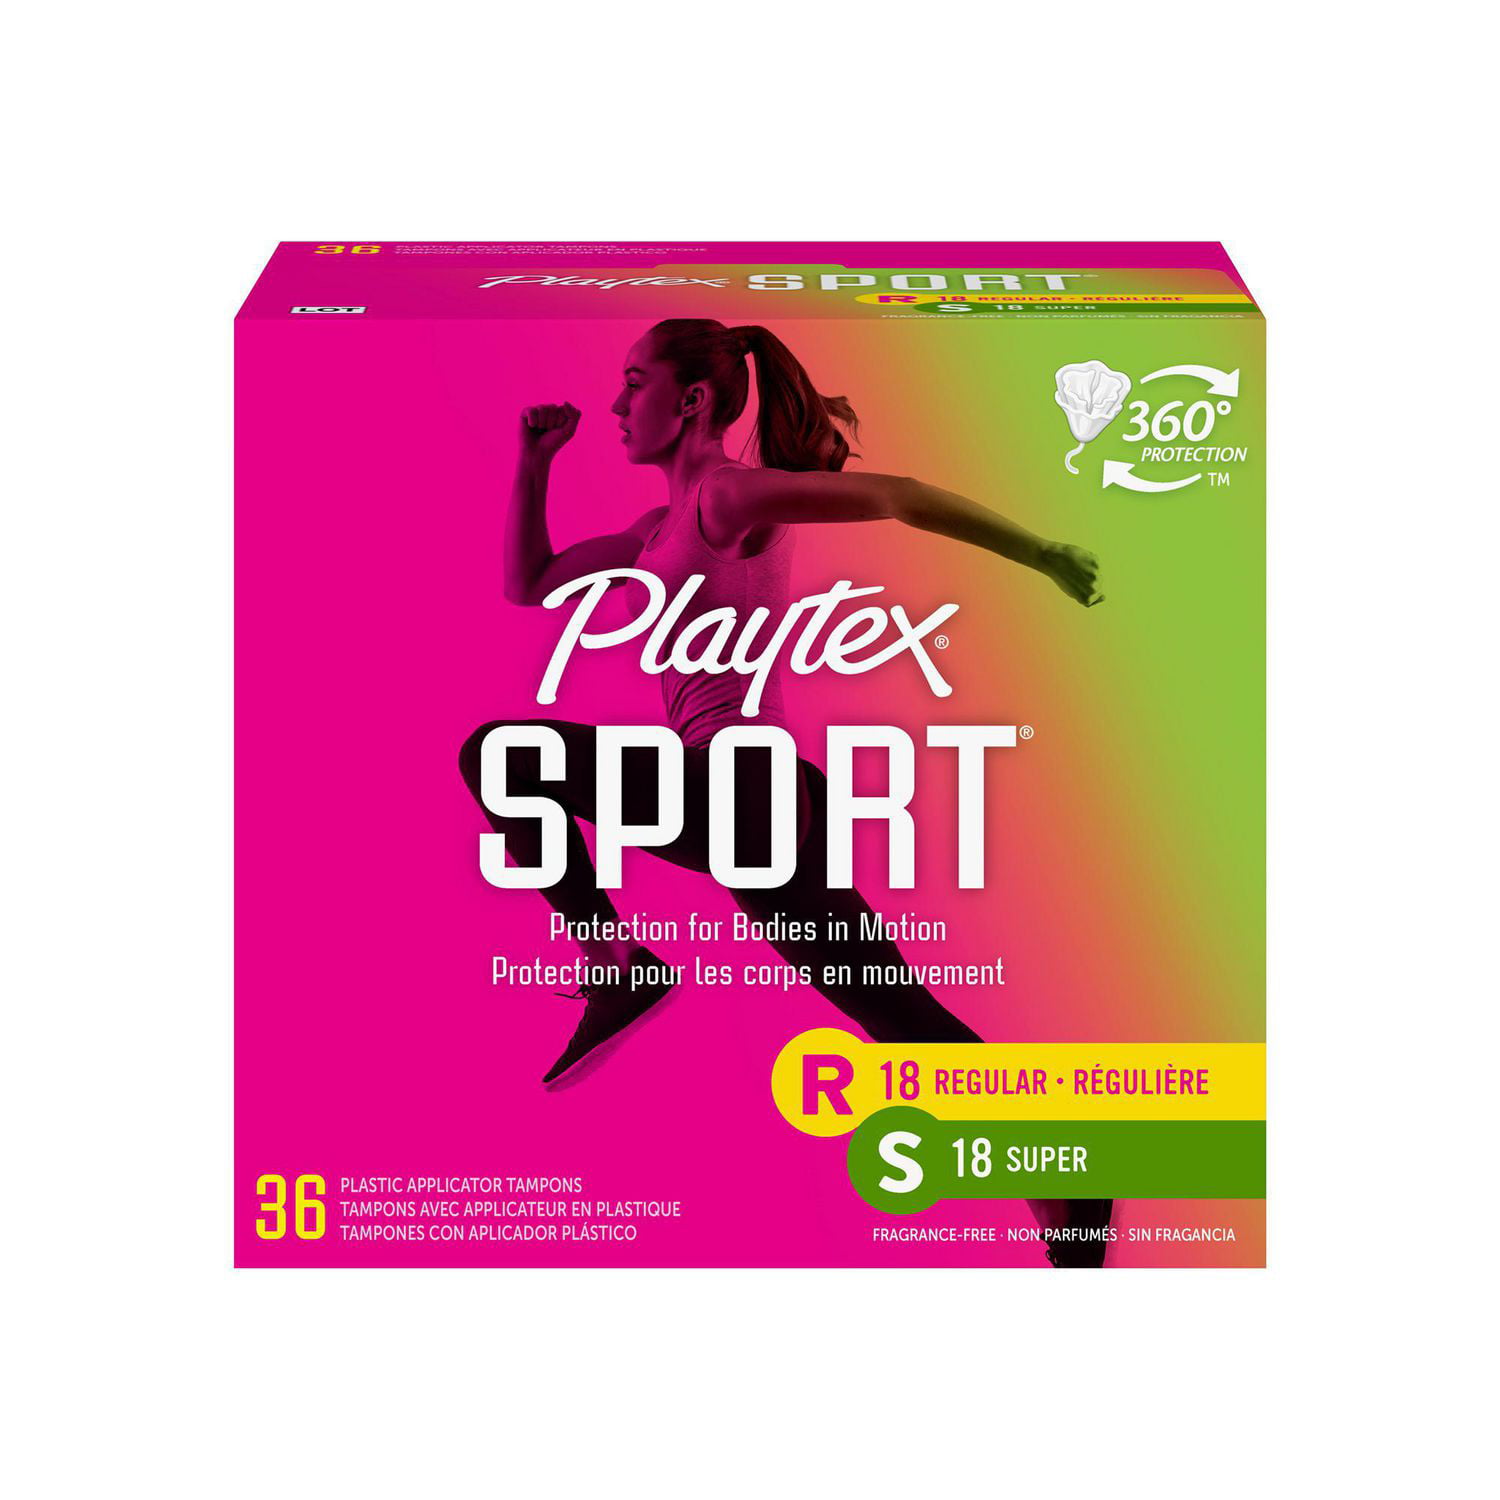 Playtex Sport Panty Liners & Unscented Tampons Combo Pack, 20 Panty Liners  & 28 Tampons